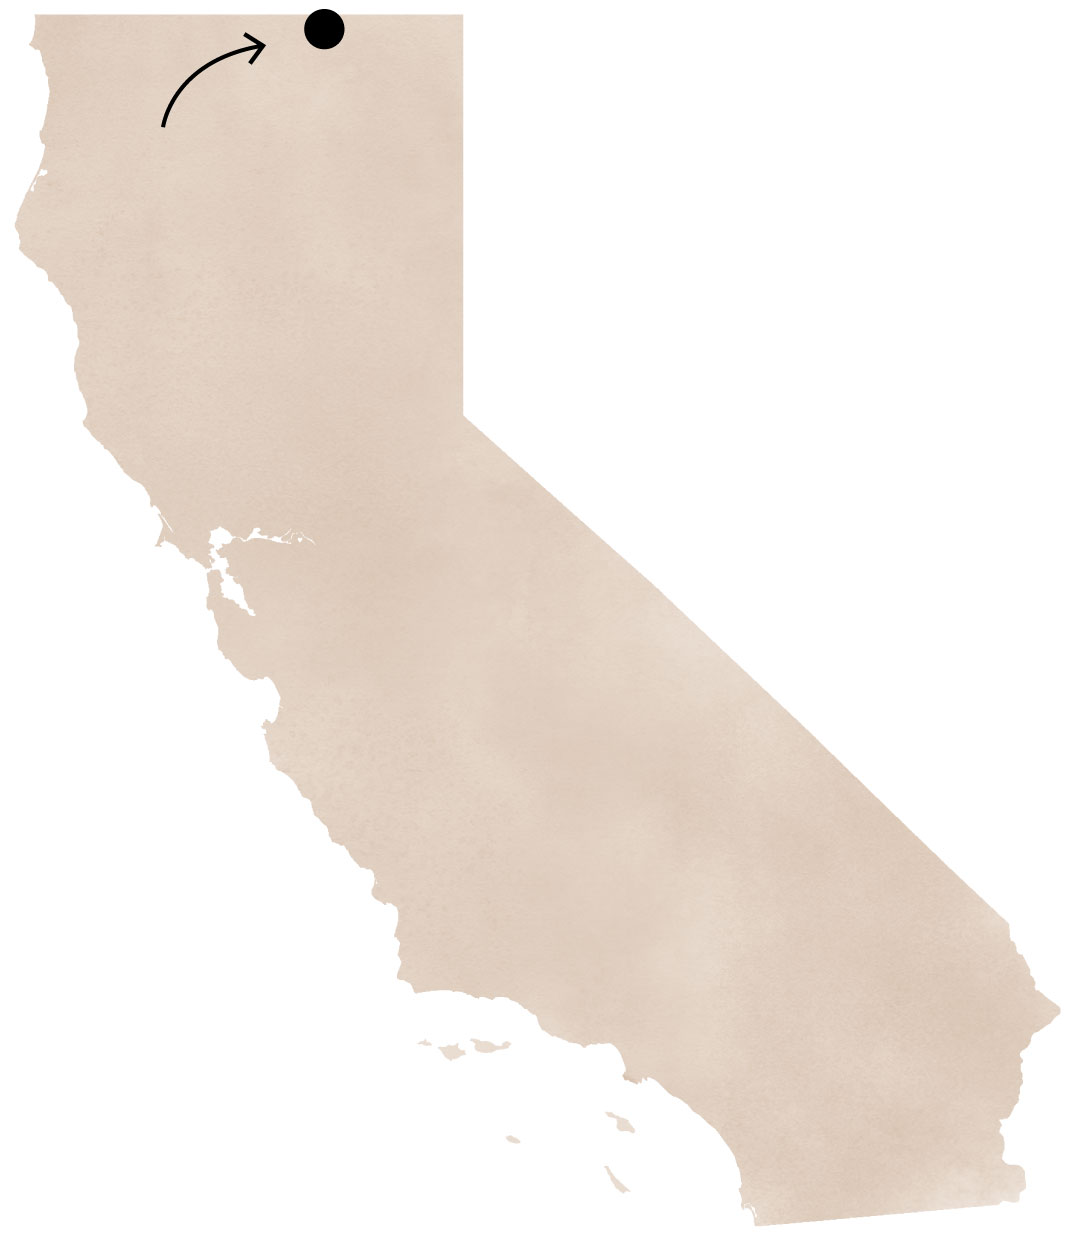 A dot on the border between California and Oregon showing Tule Lake’s location in California